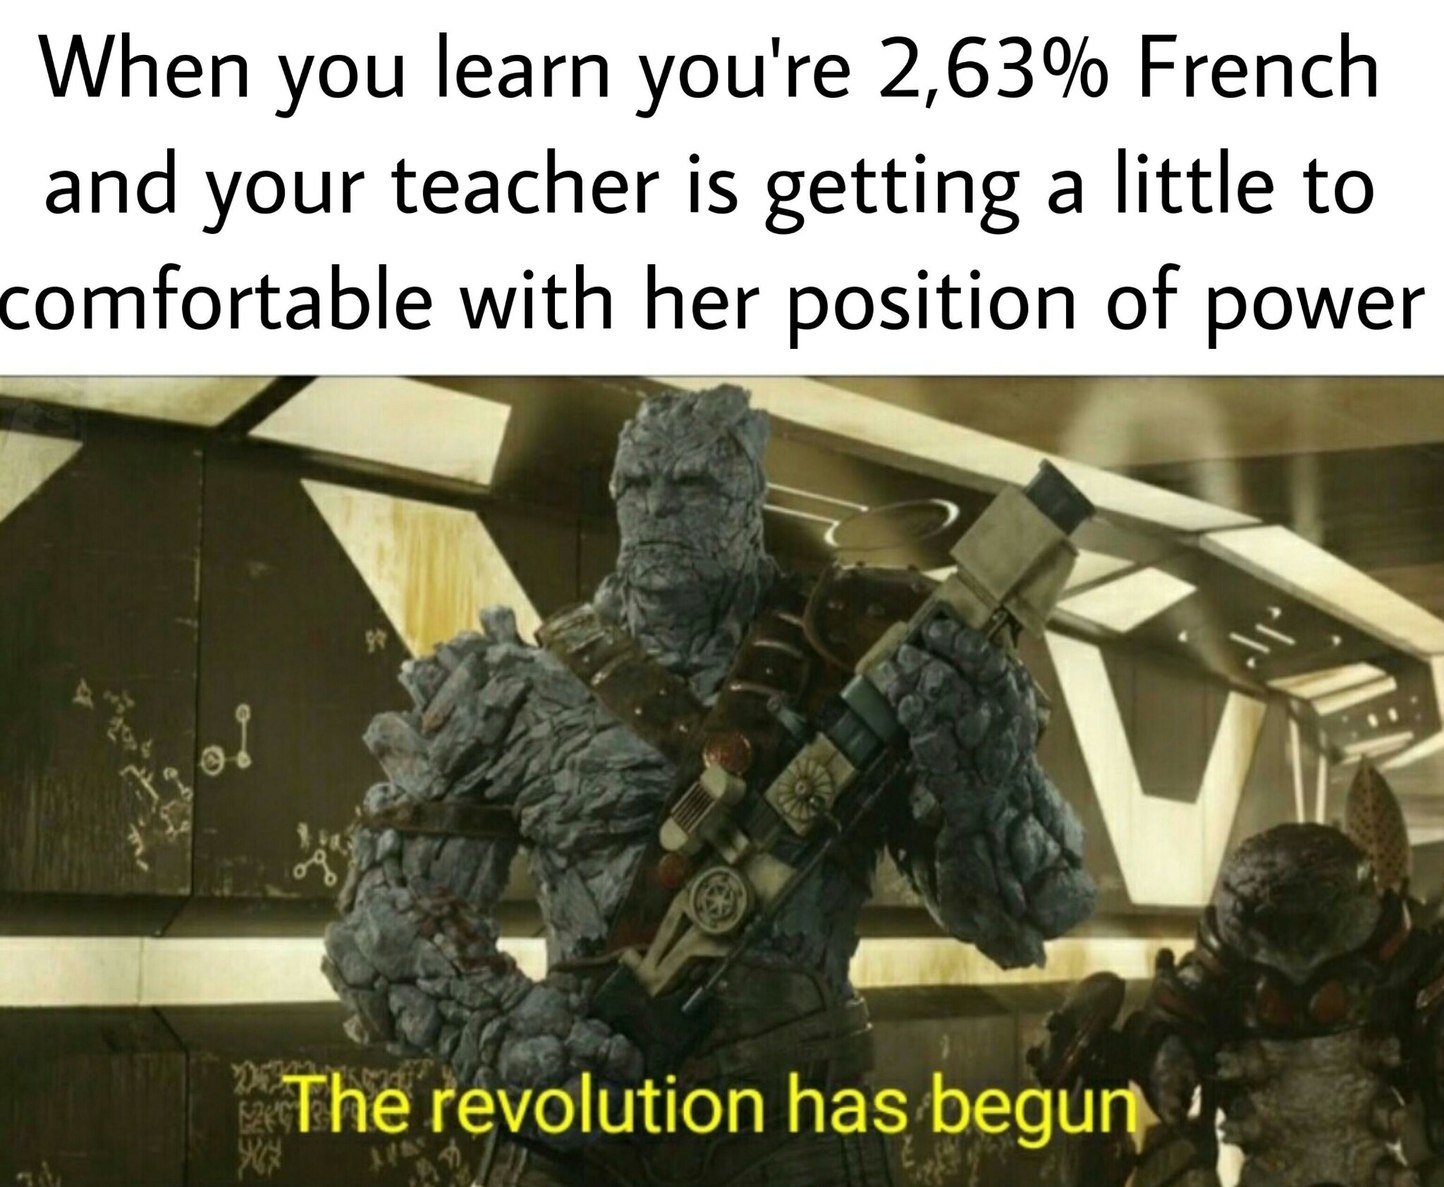 Man the french are a bunch of pussies, no joke - meme